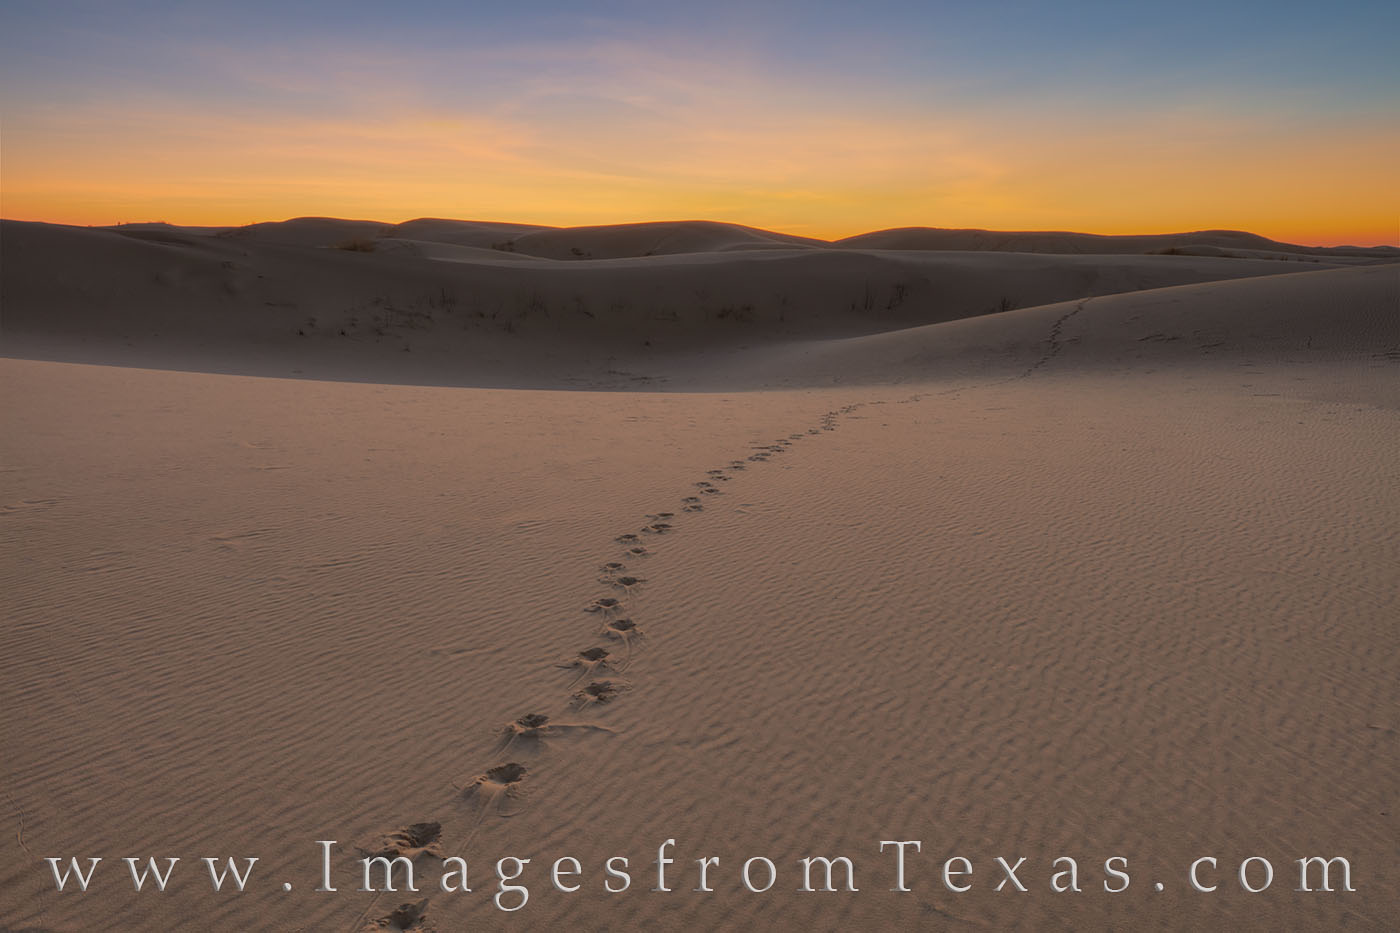 Tracks across the sand, perhaps from a Sandhills coyote, lead into the eastern sky where sunrise awaits. At times like this when...